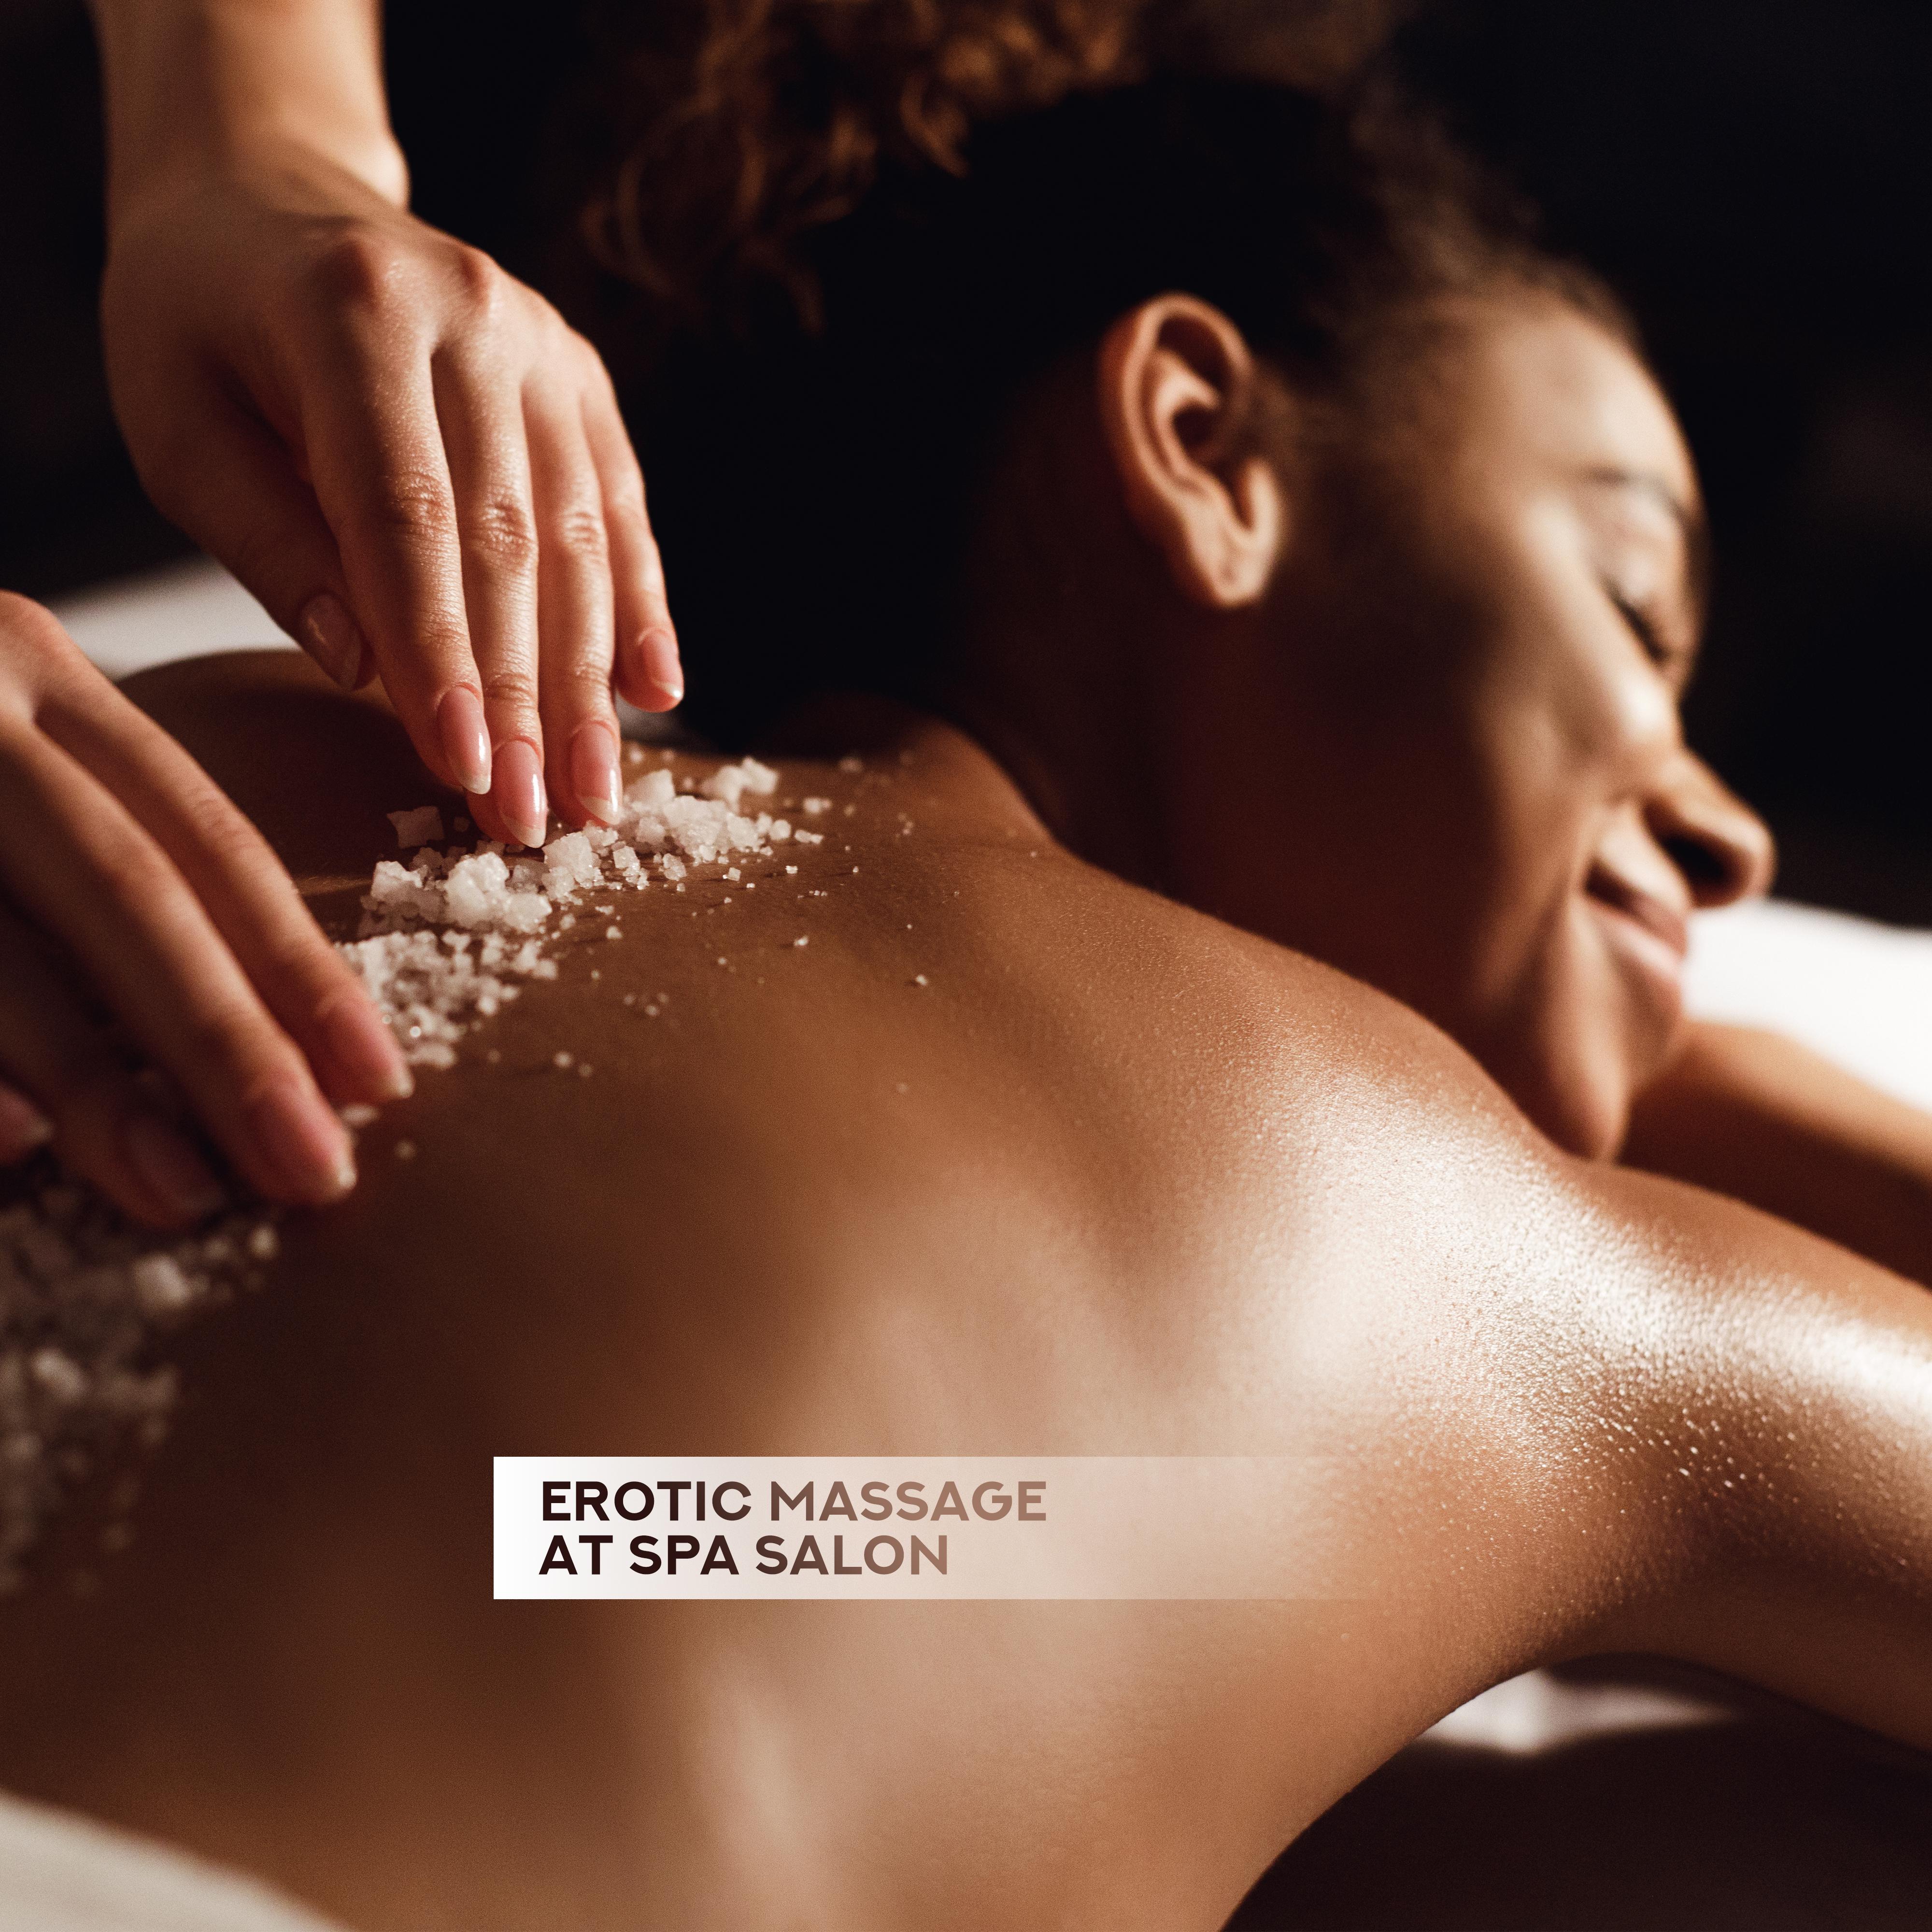 Erotic Massage at Spa Salon: Compilation of Best 2019 New Age Music for Perfect Relaxation at Spa, Massage Songs, Wellness